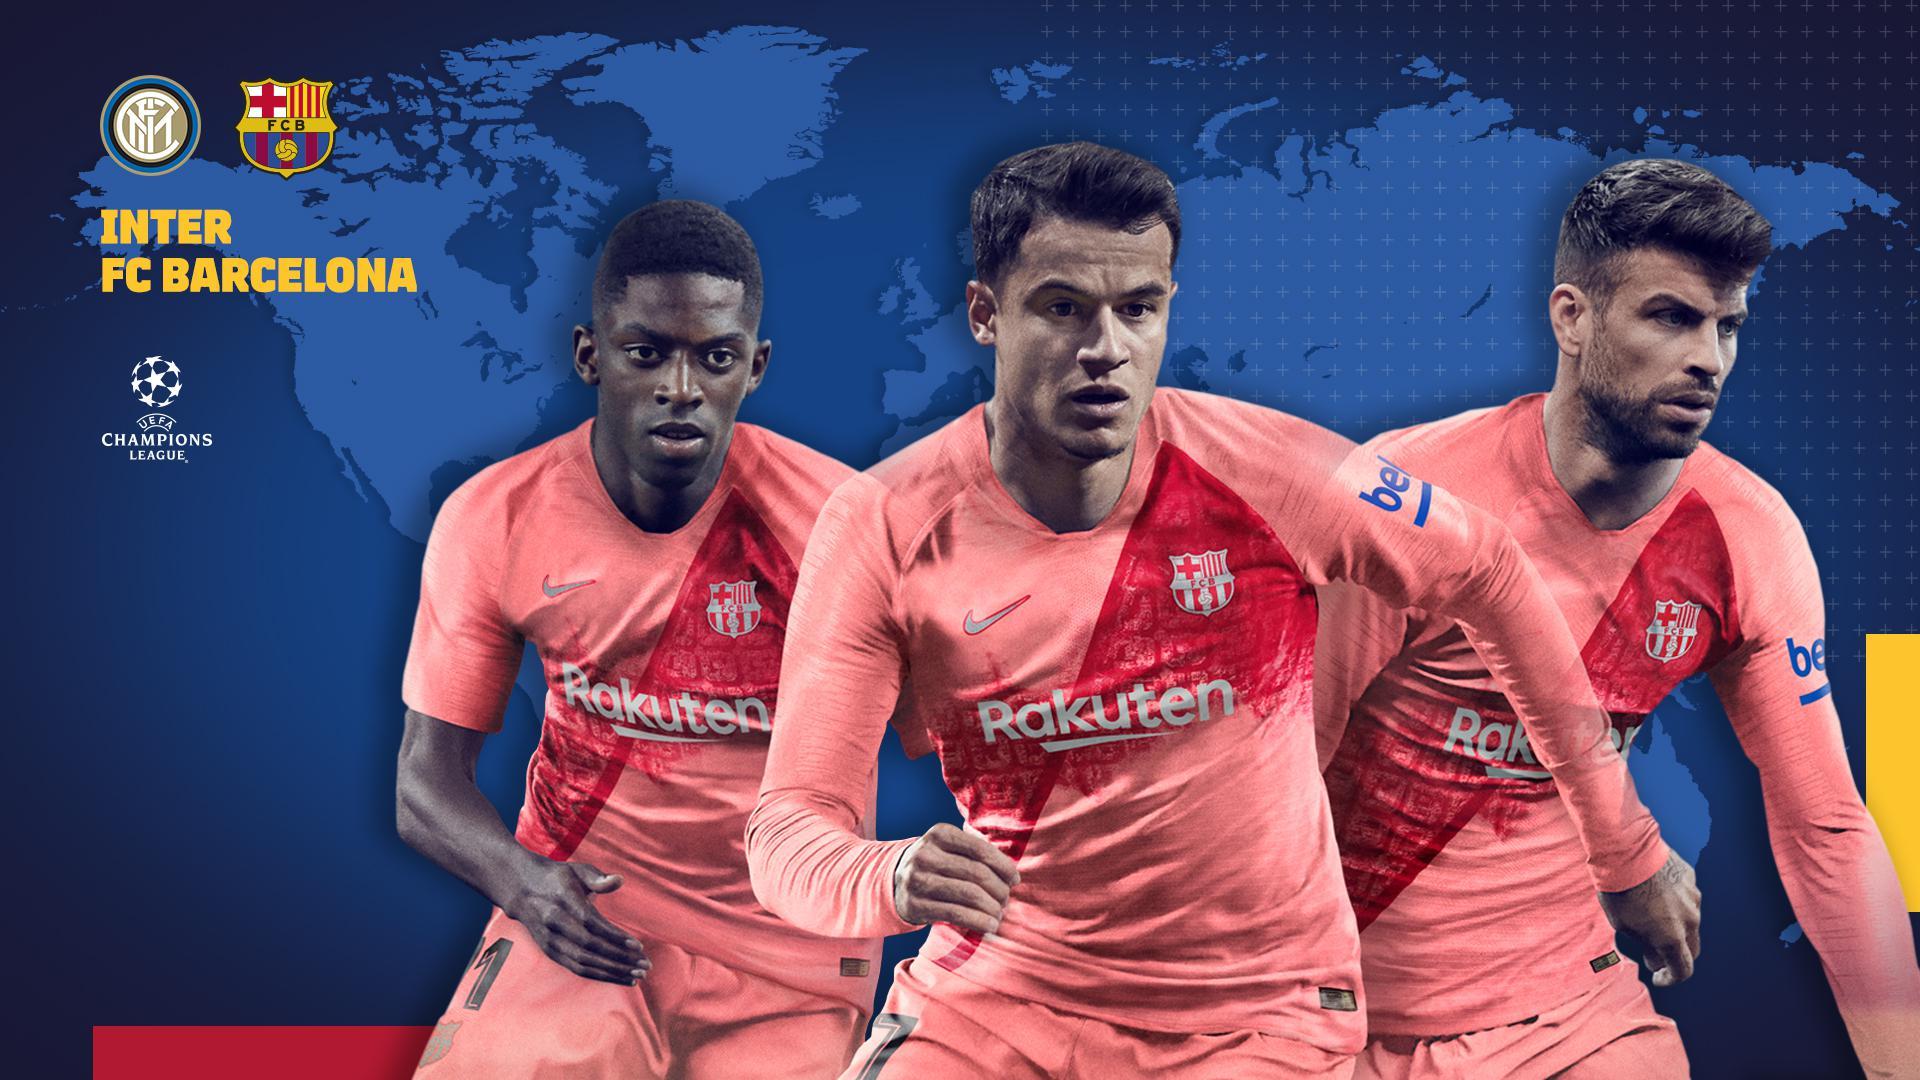 When and where to watch Inter vs FC Barcelona